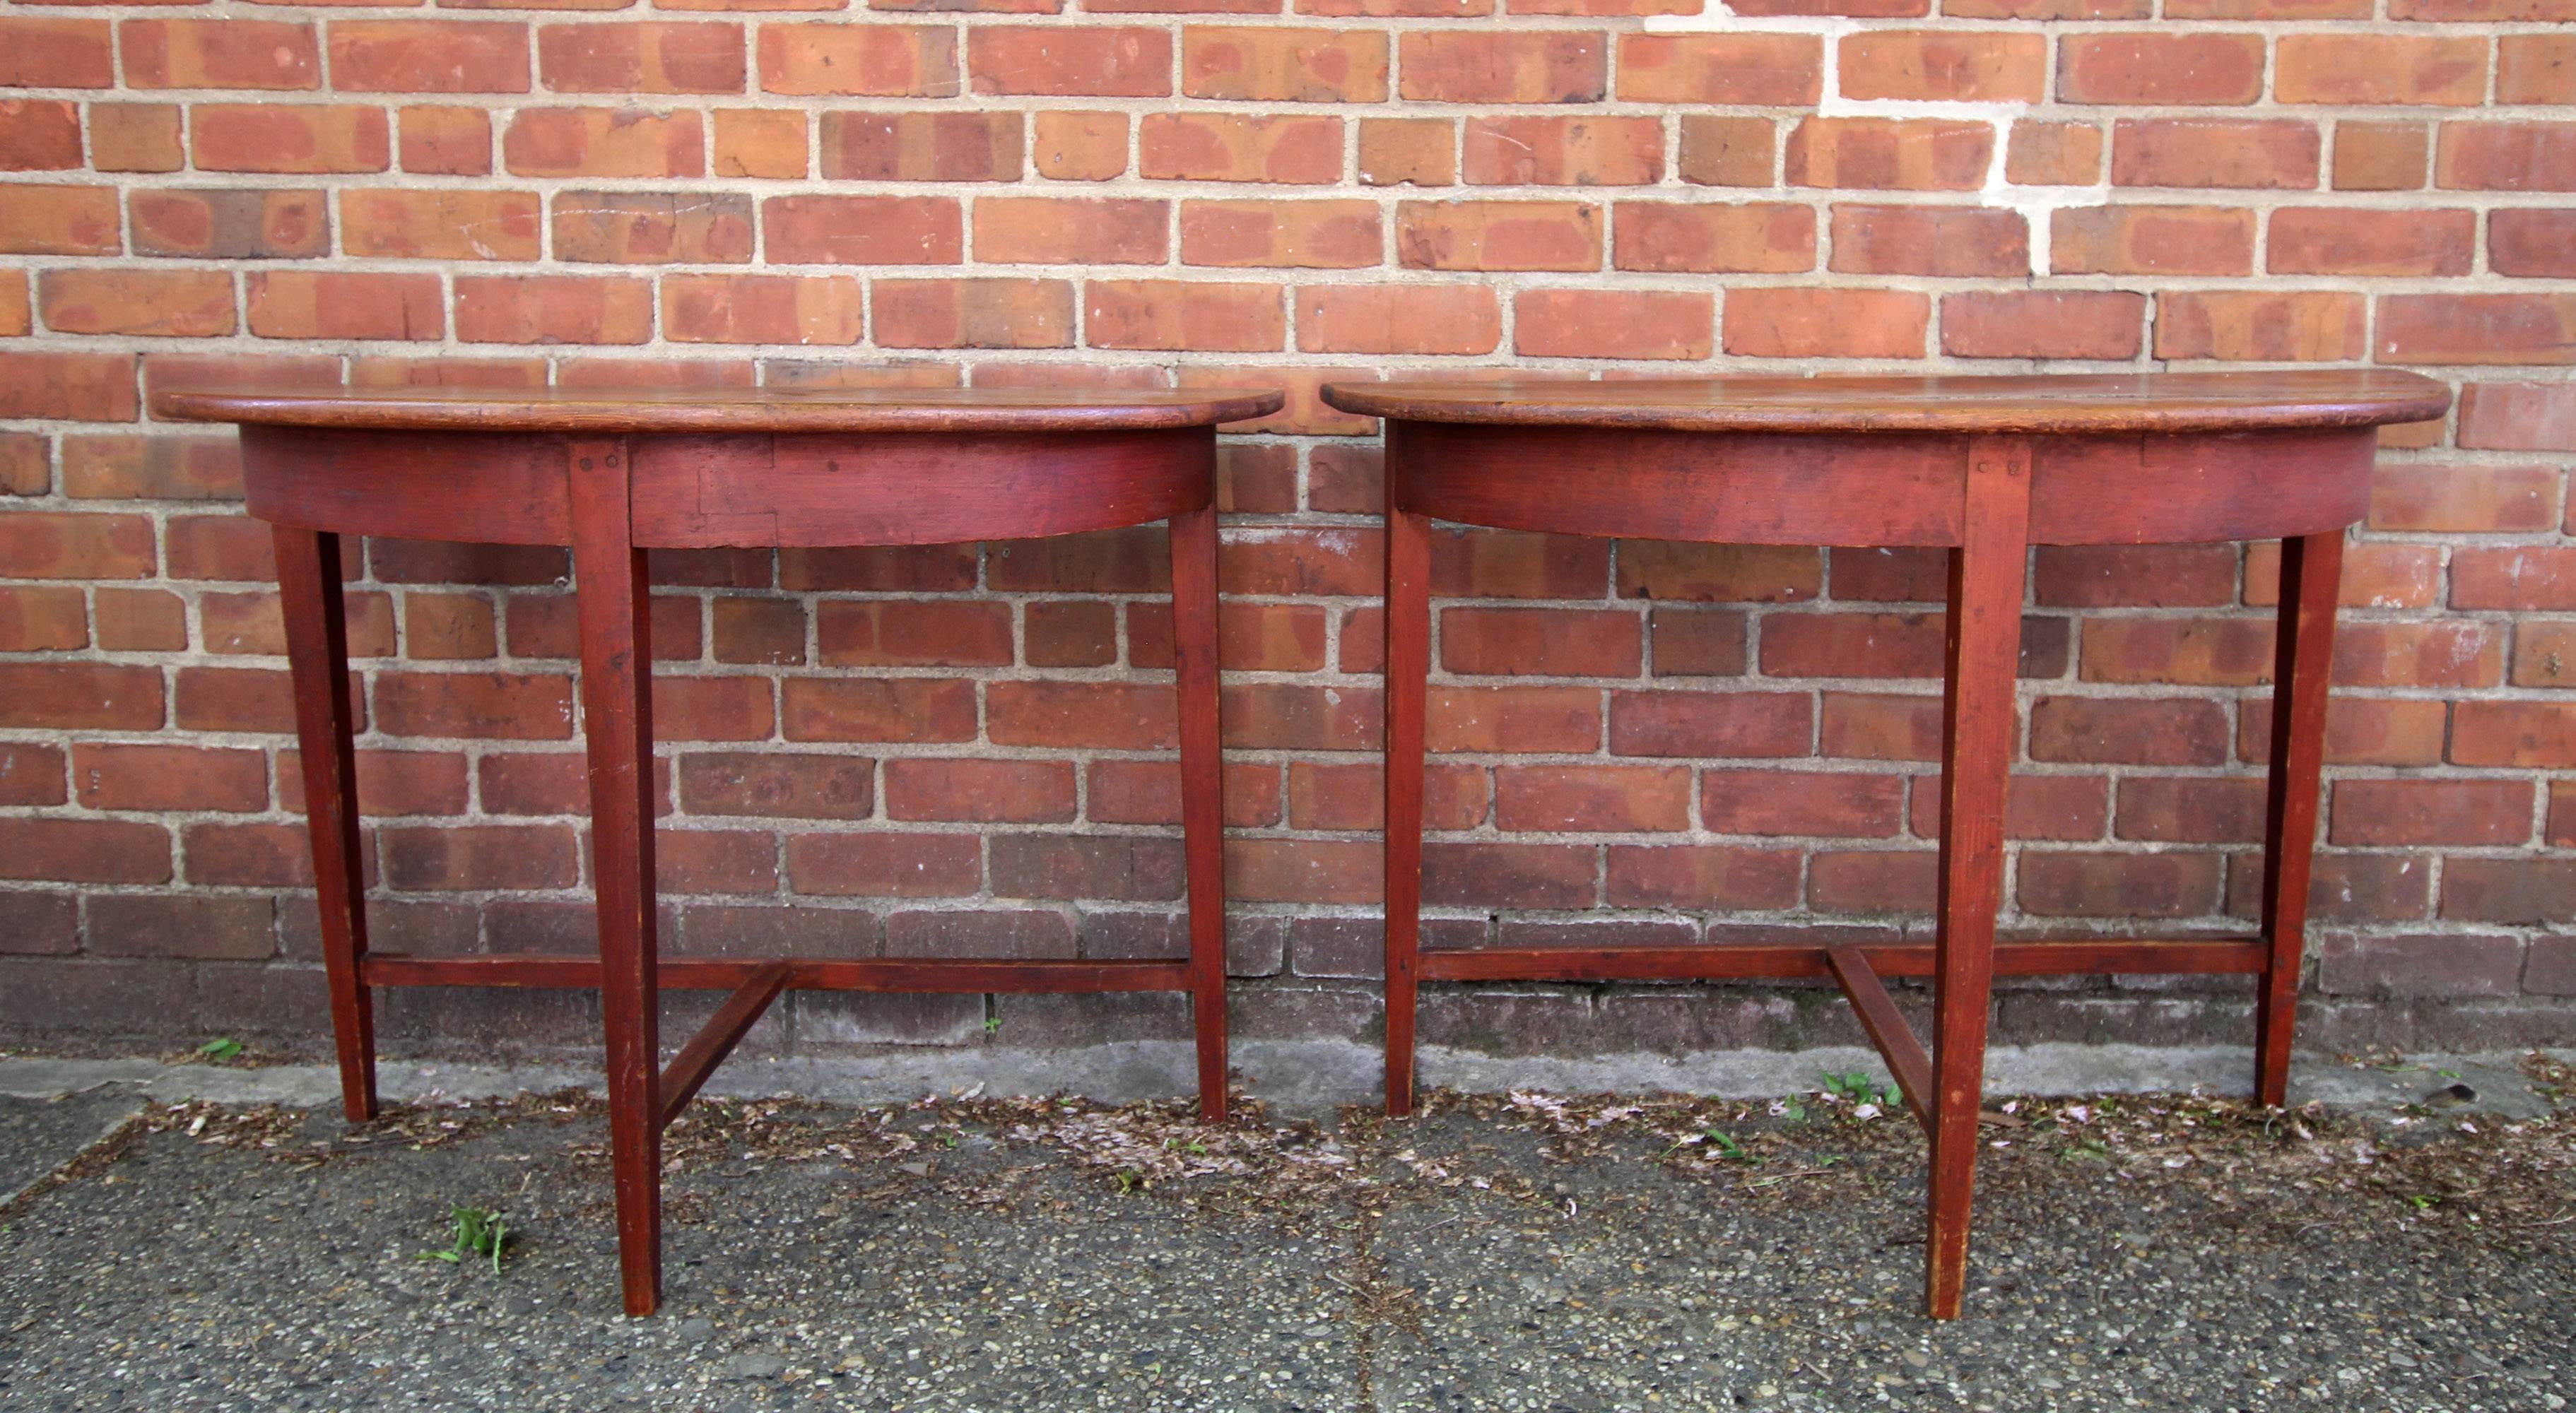 Pair of longleaf pine demilune tables with clean lines, tapered legs and t-shaped stretchers. Red washed bases and scrubbed tops. Mid-19th century American, probably southern. Notice that these two tables do not make one circular table when put